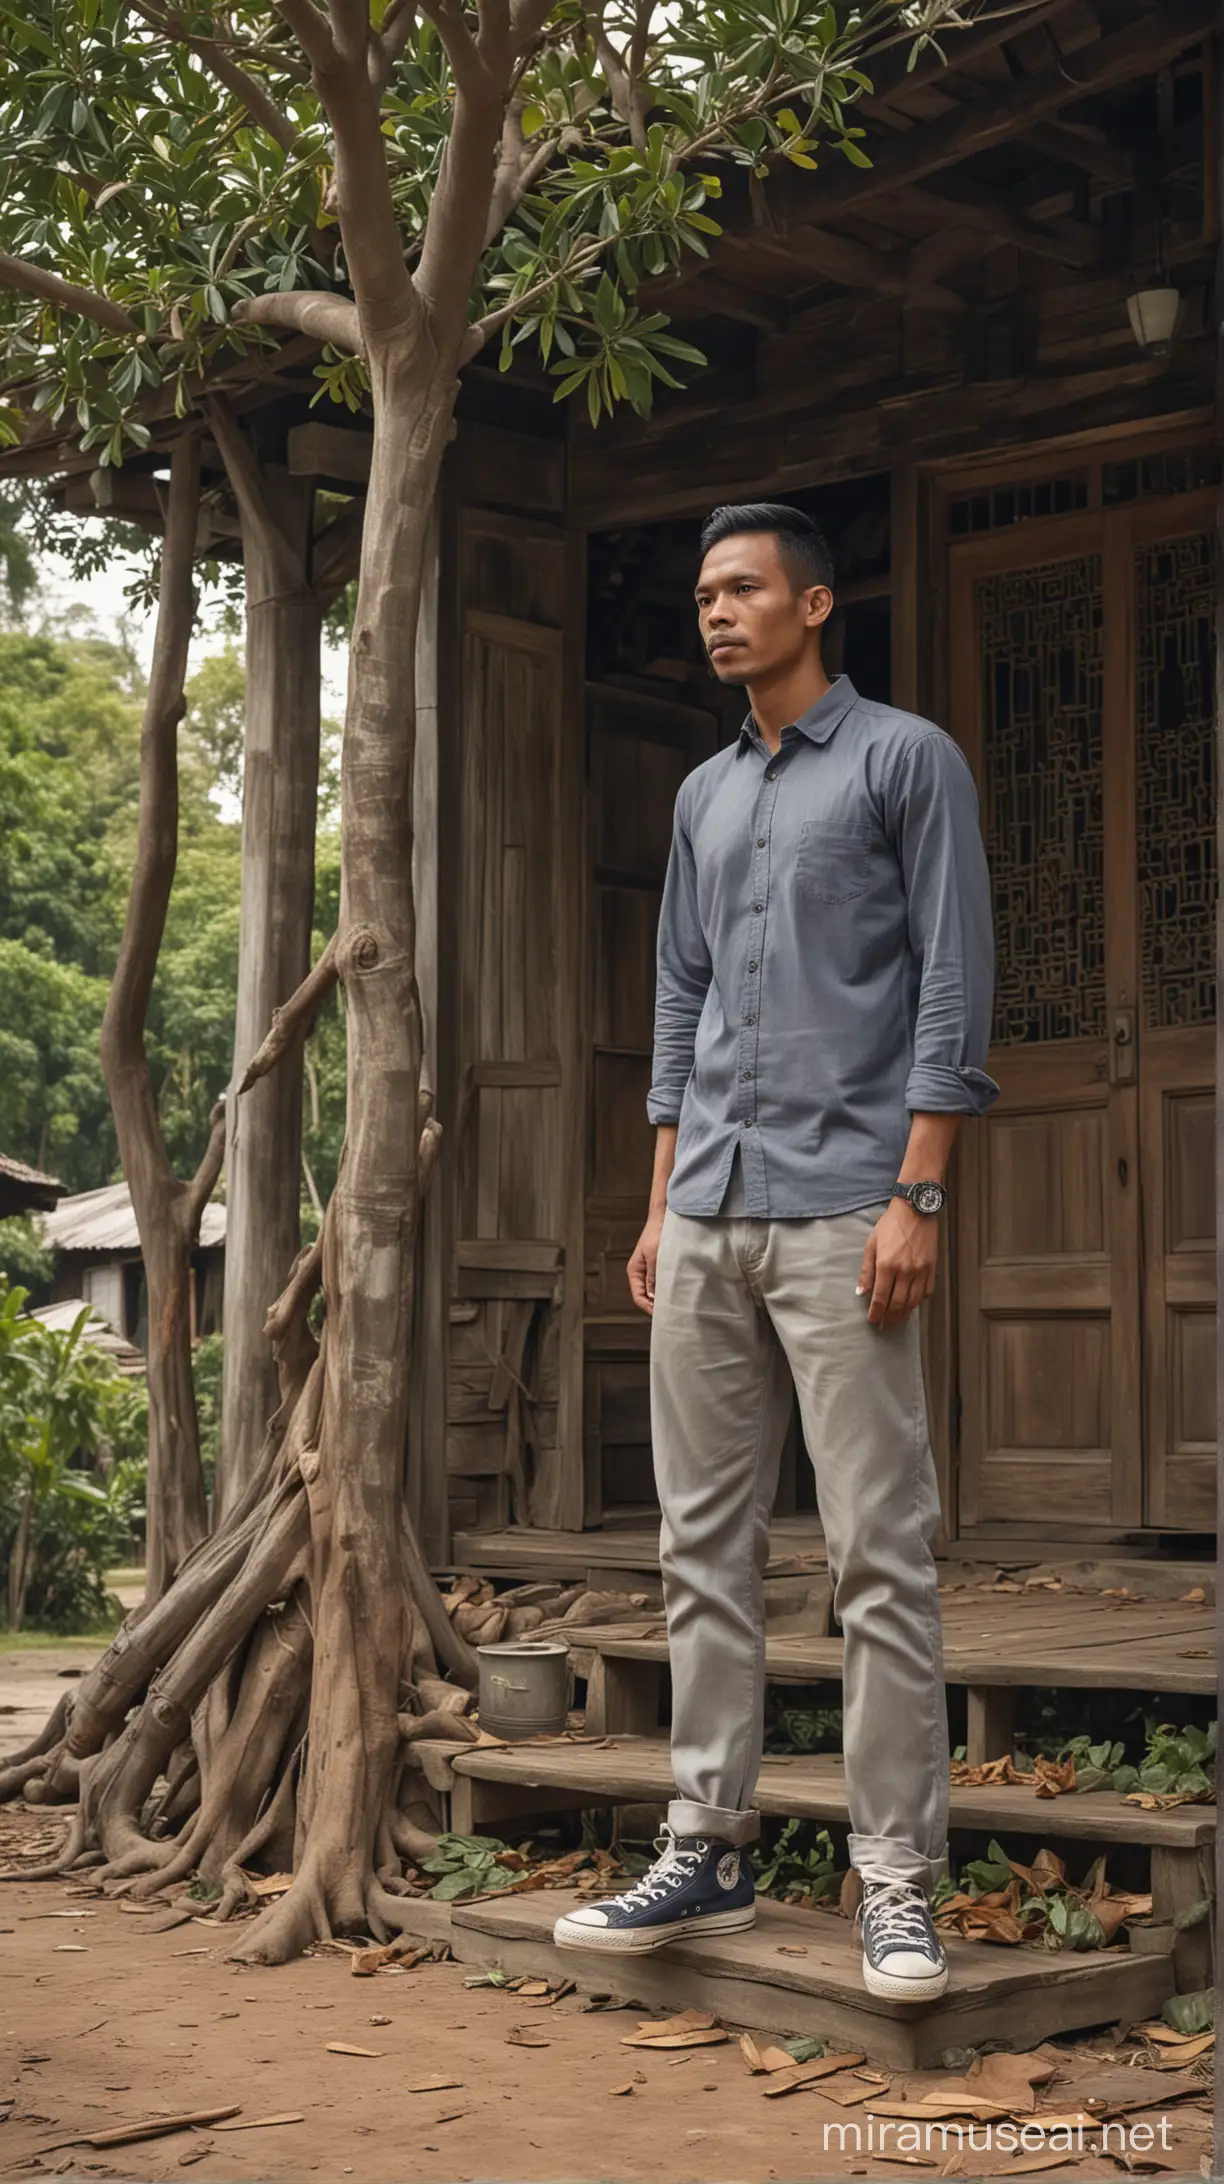 Indonesian Man Standing in Front Yard of Rustic Wooden House